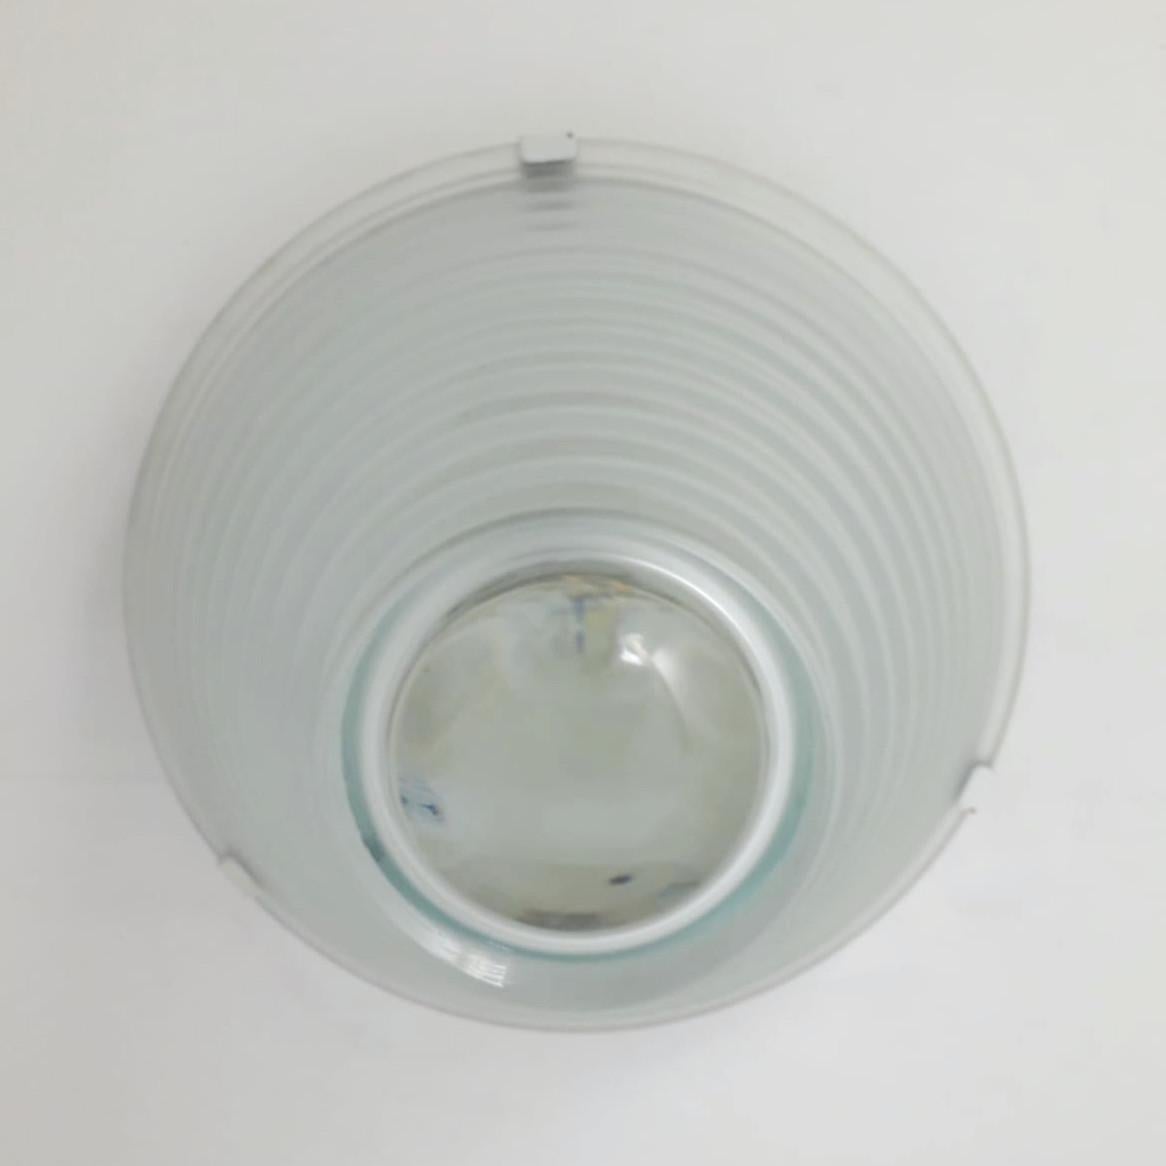 Italian vintage wall light or flush mount with white sanded glass shade and clear glass lens on top / Designed by Angelo Mangiarotti for Artemide circa 1970s / Made in Italy
Original label on the frame
1 light / E27 type / Max 100W
Measures: